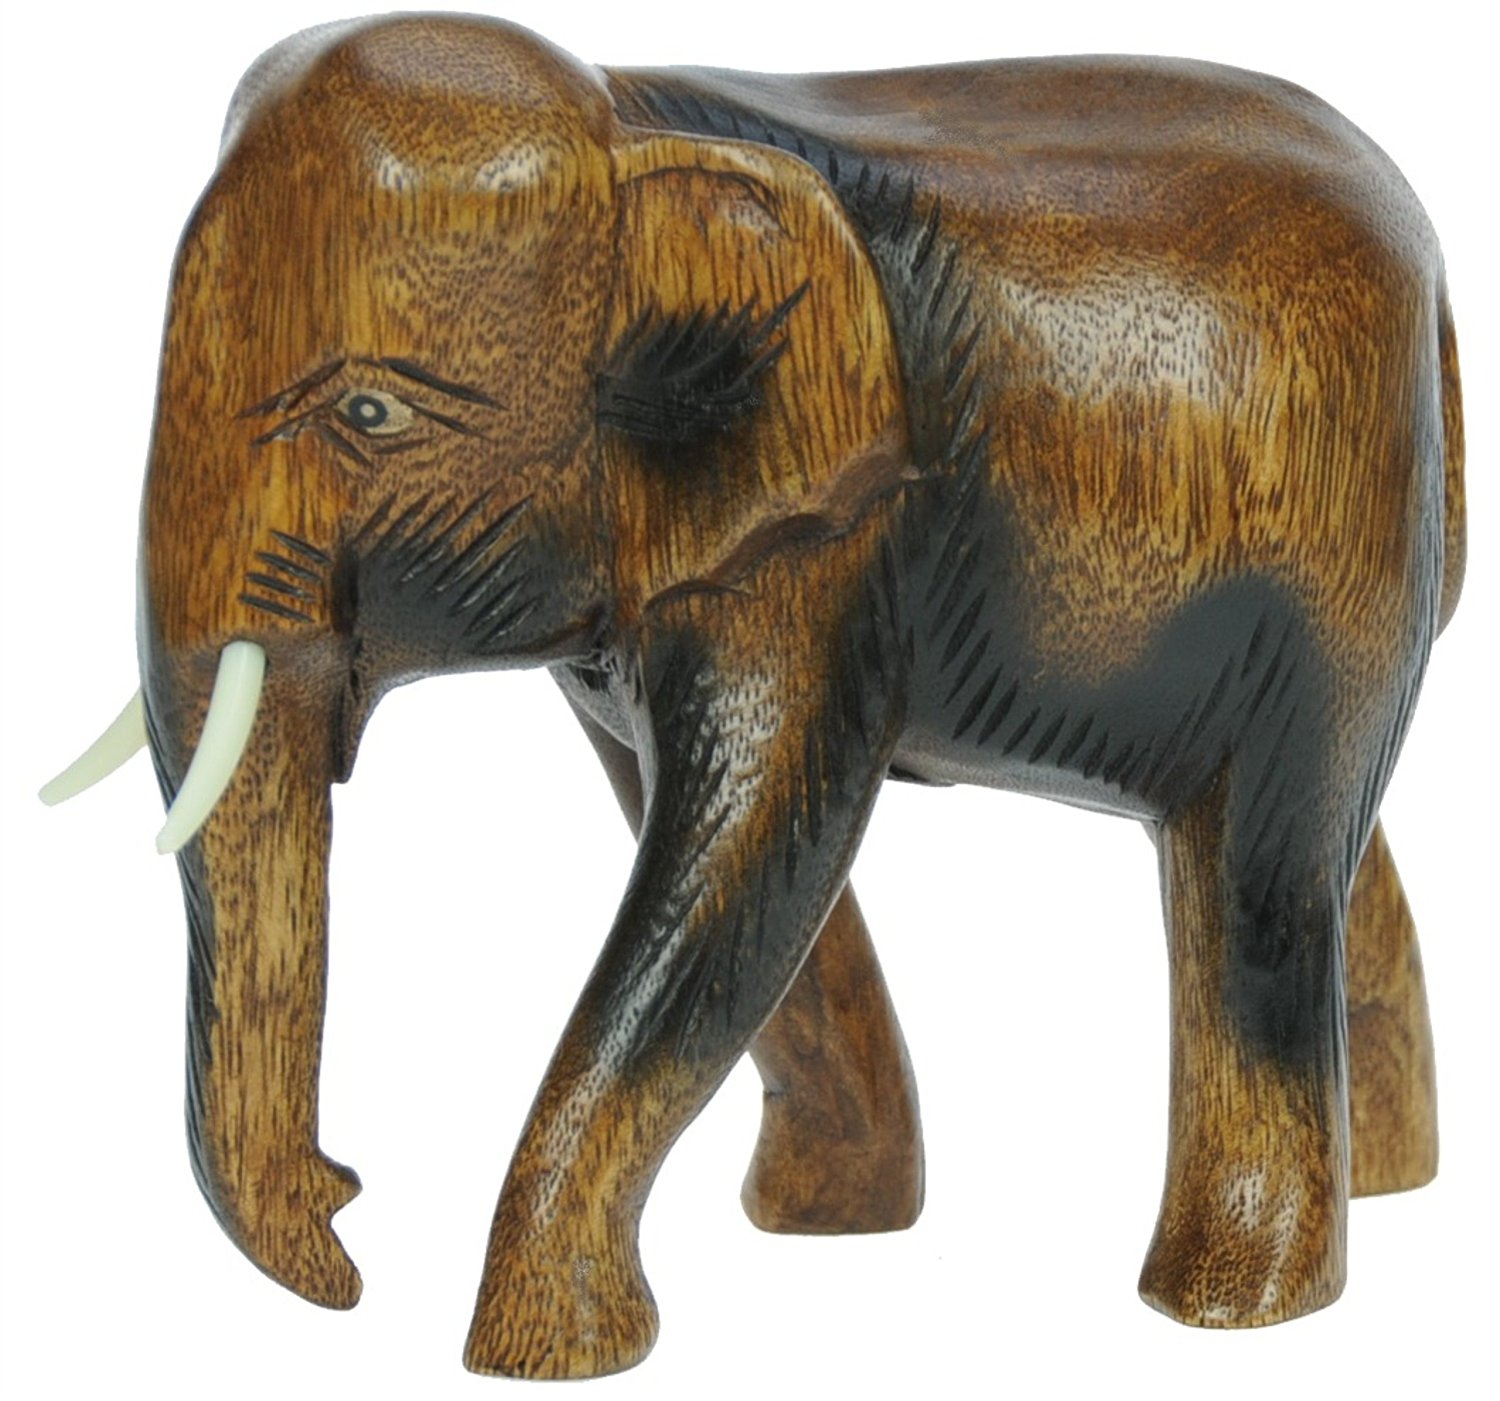 Namesakes Hand Carved Wooden Elephant Ornament : Top Christmas and ...